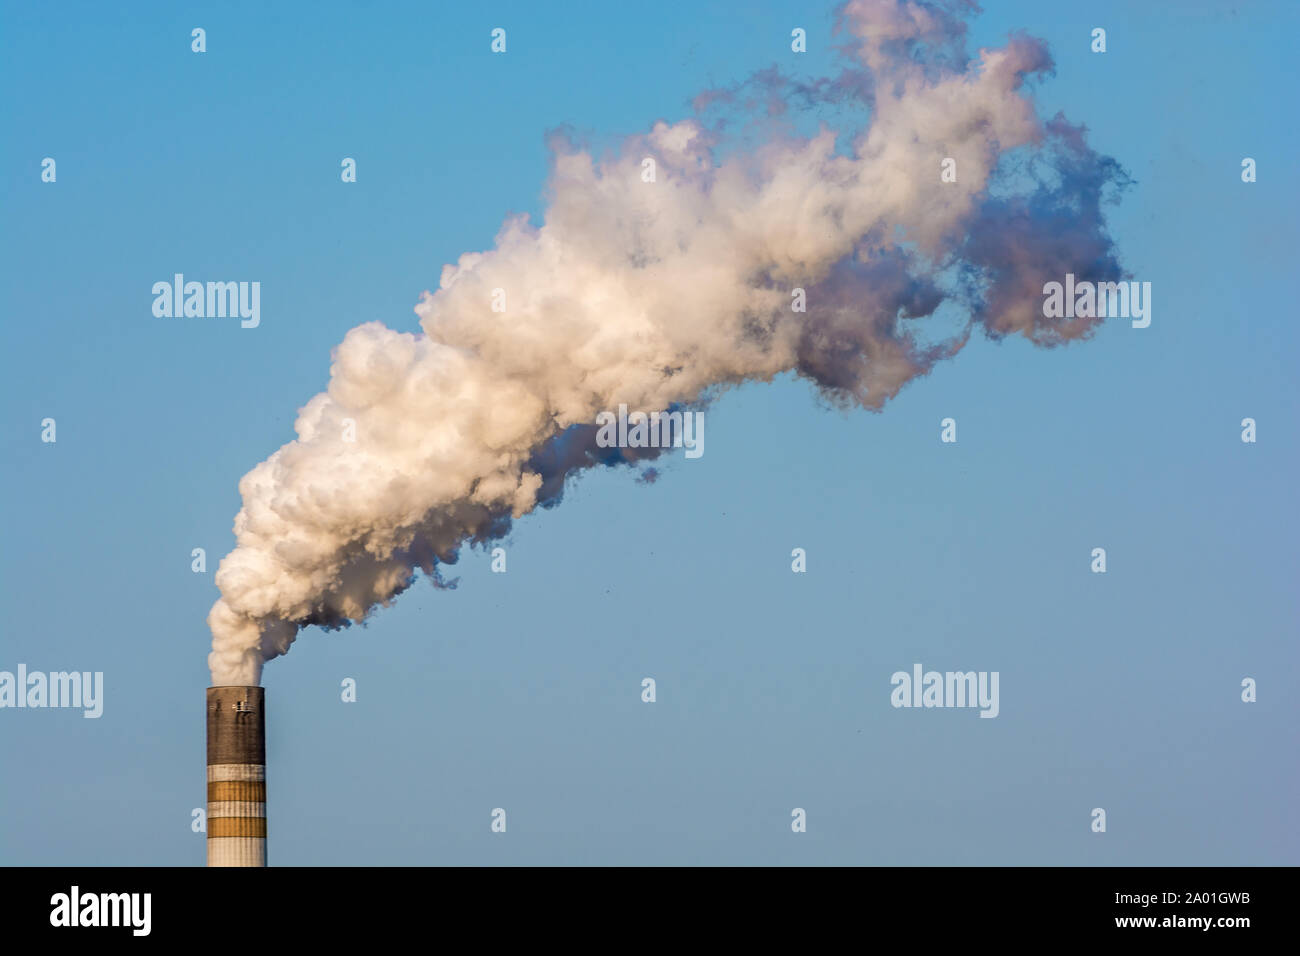 Highly smoking chimney against a blue sky Stock Photo